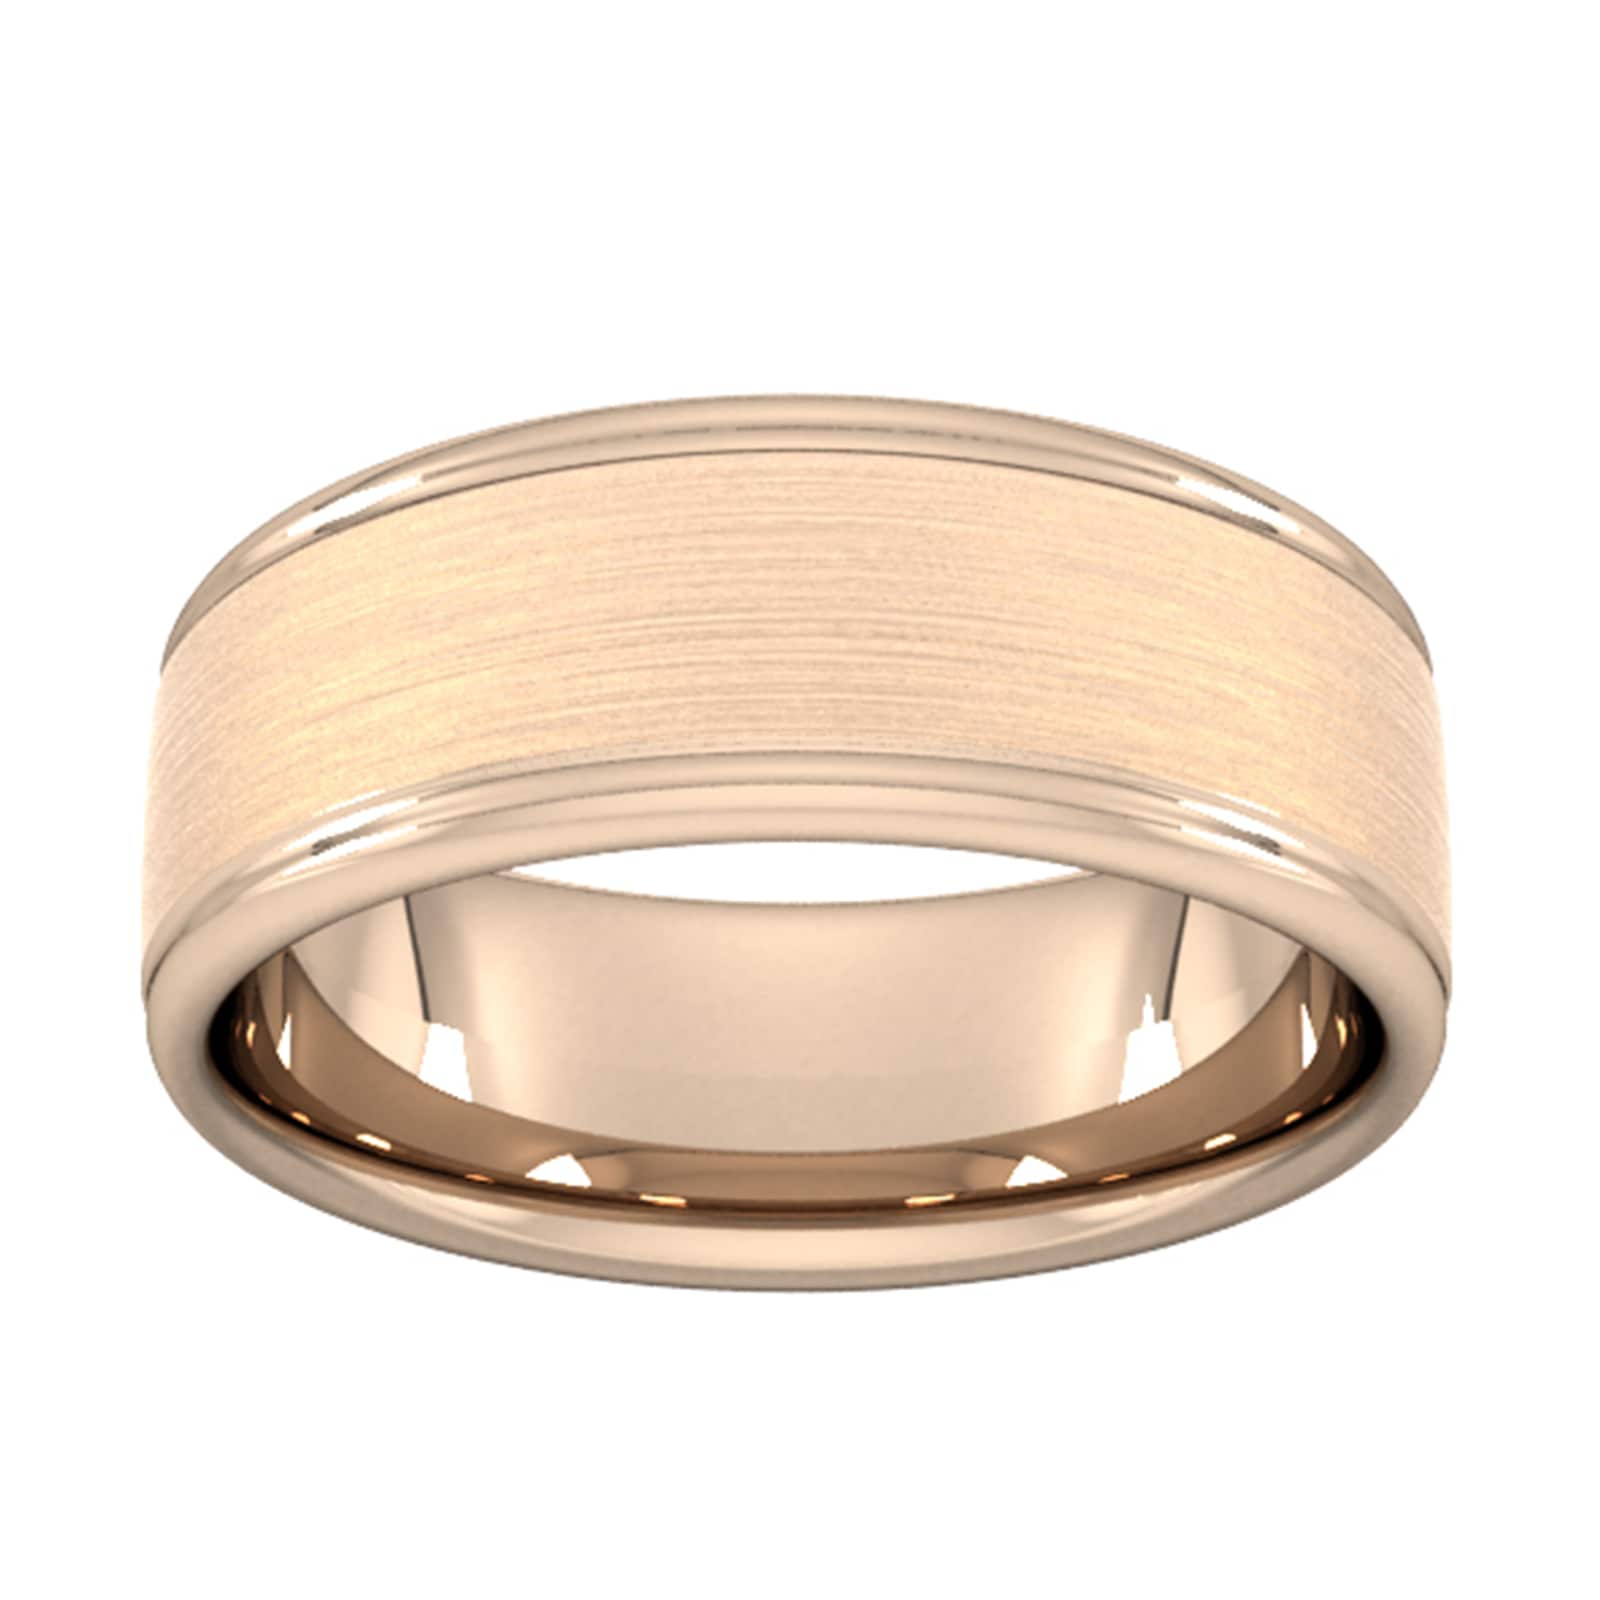 8mm Flat Court Heavy Matt Centre With Grooves Wedding Ring In 9 Carat Rose Gold - Ring Size O